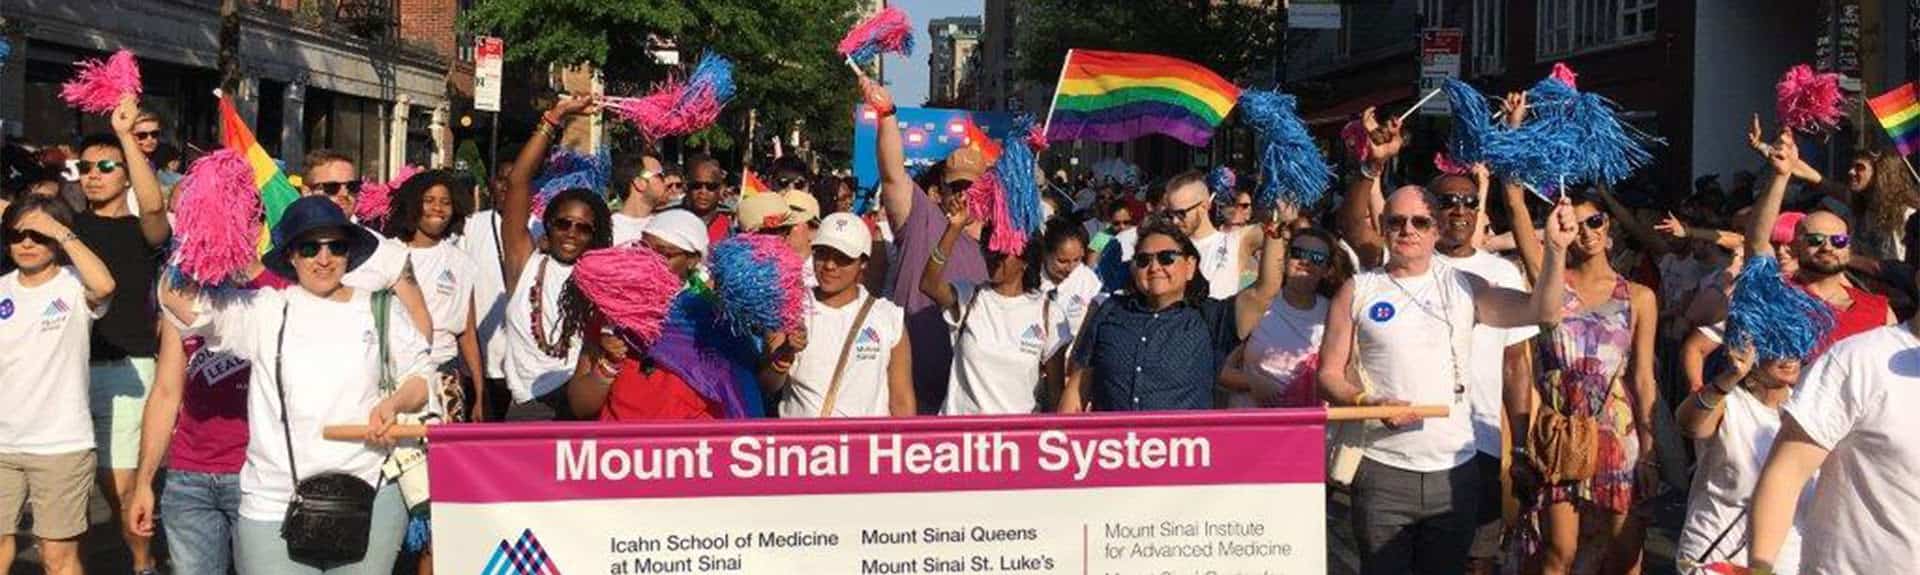 LGBT parade with walkers holding Mount Sinai banner